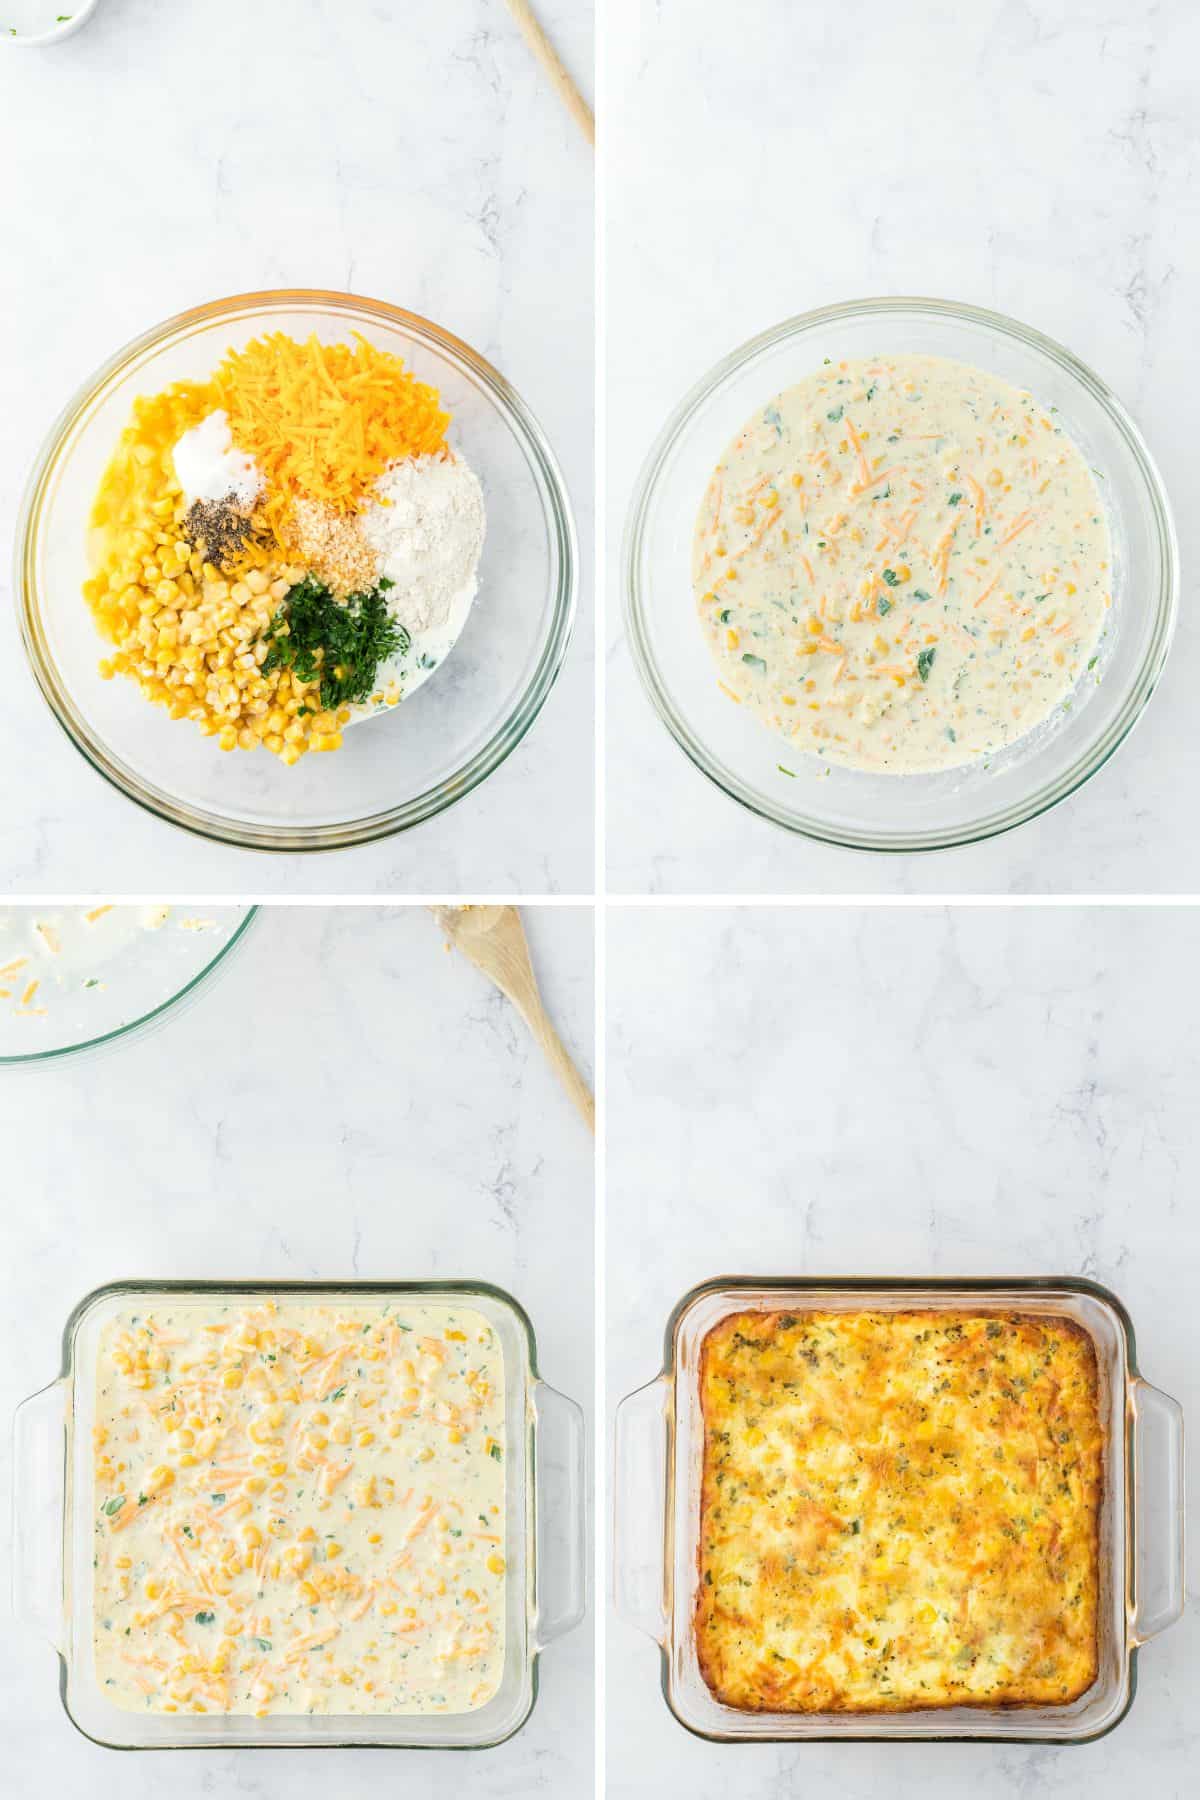 Collage of steps to make this recipe, including mixing all the ingredients, pouring them in the glass baking dish, and scalloped corn after baking